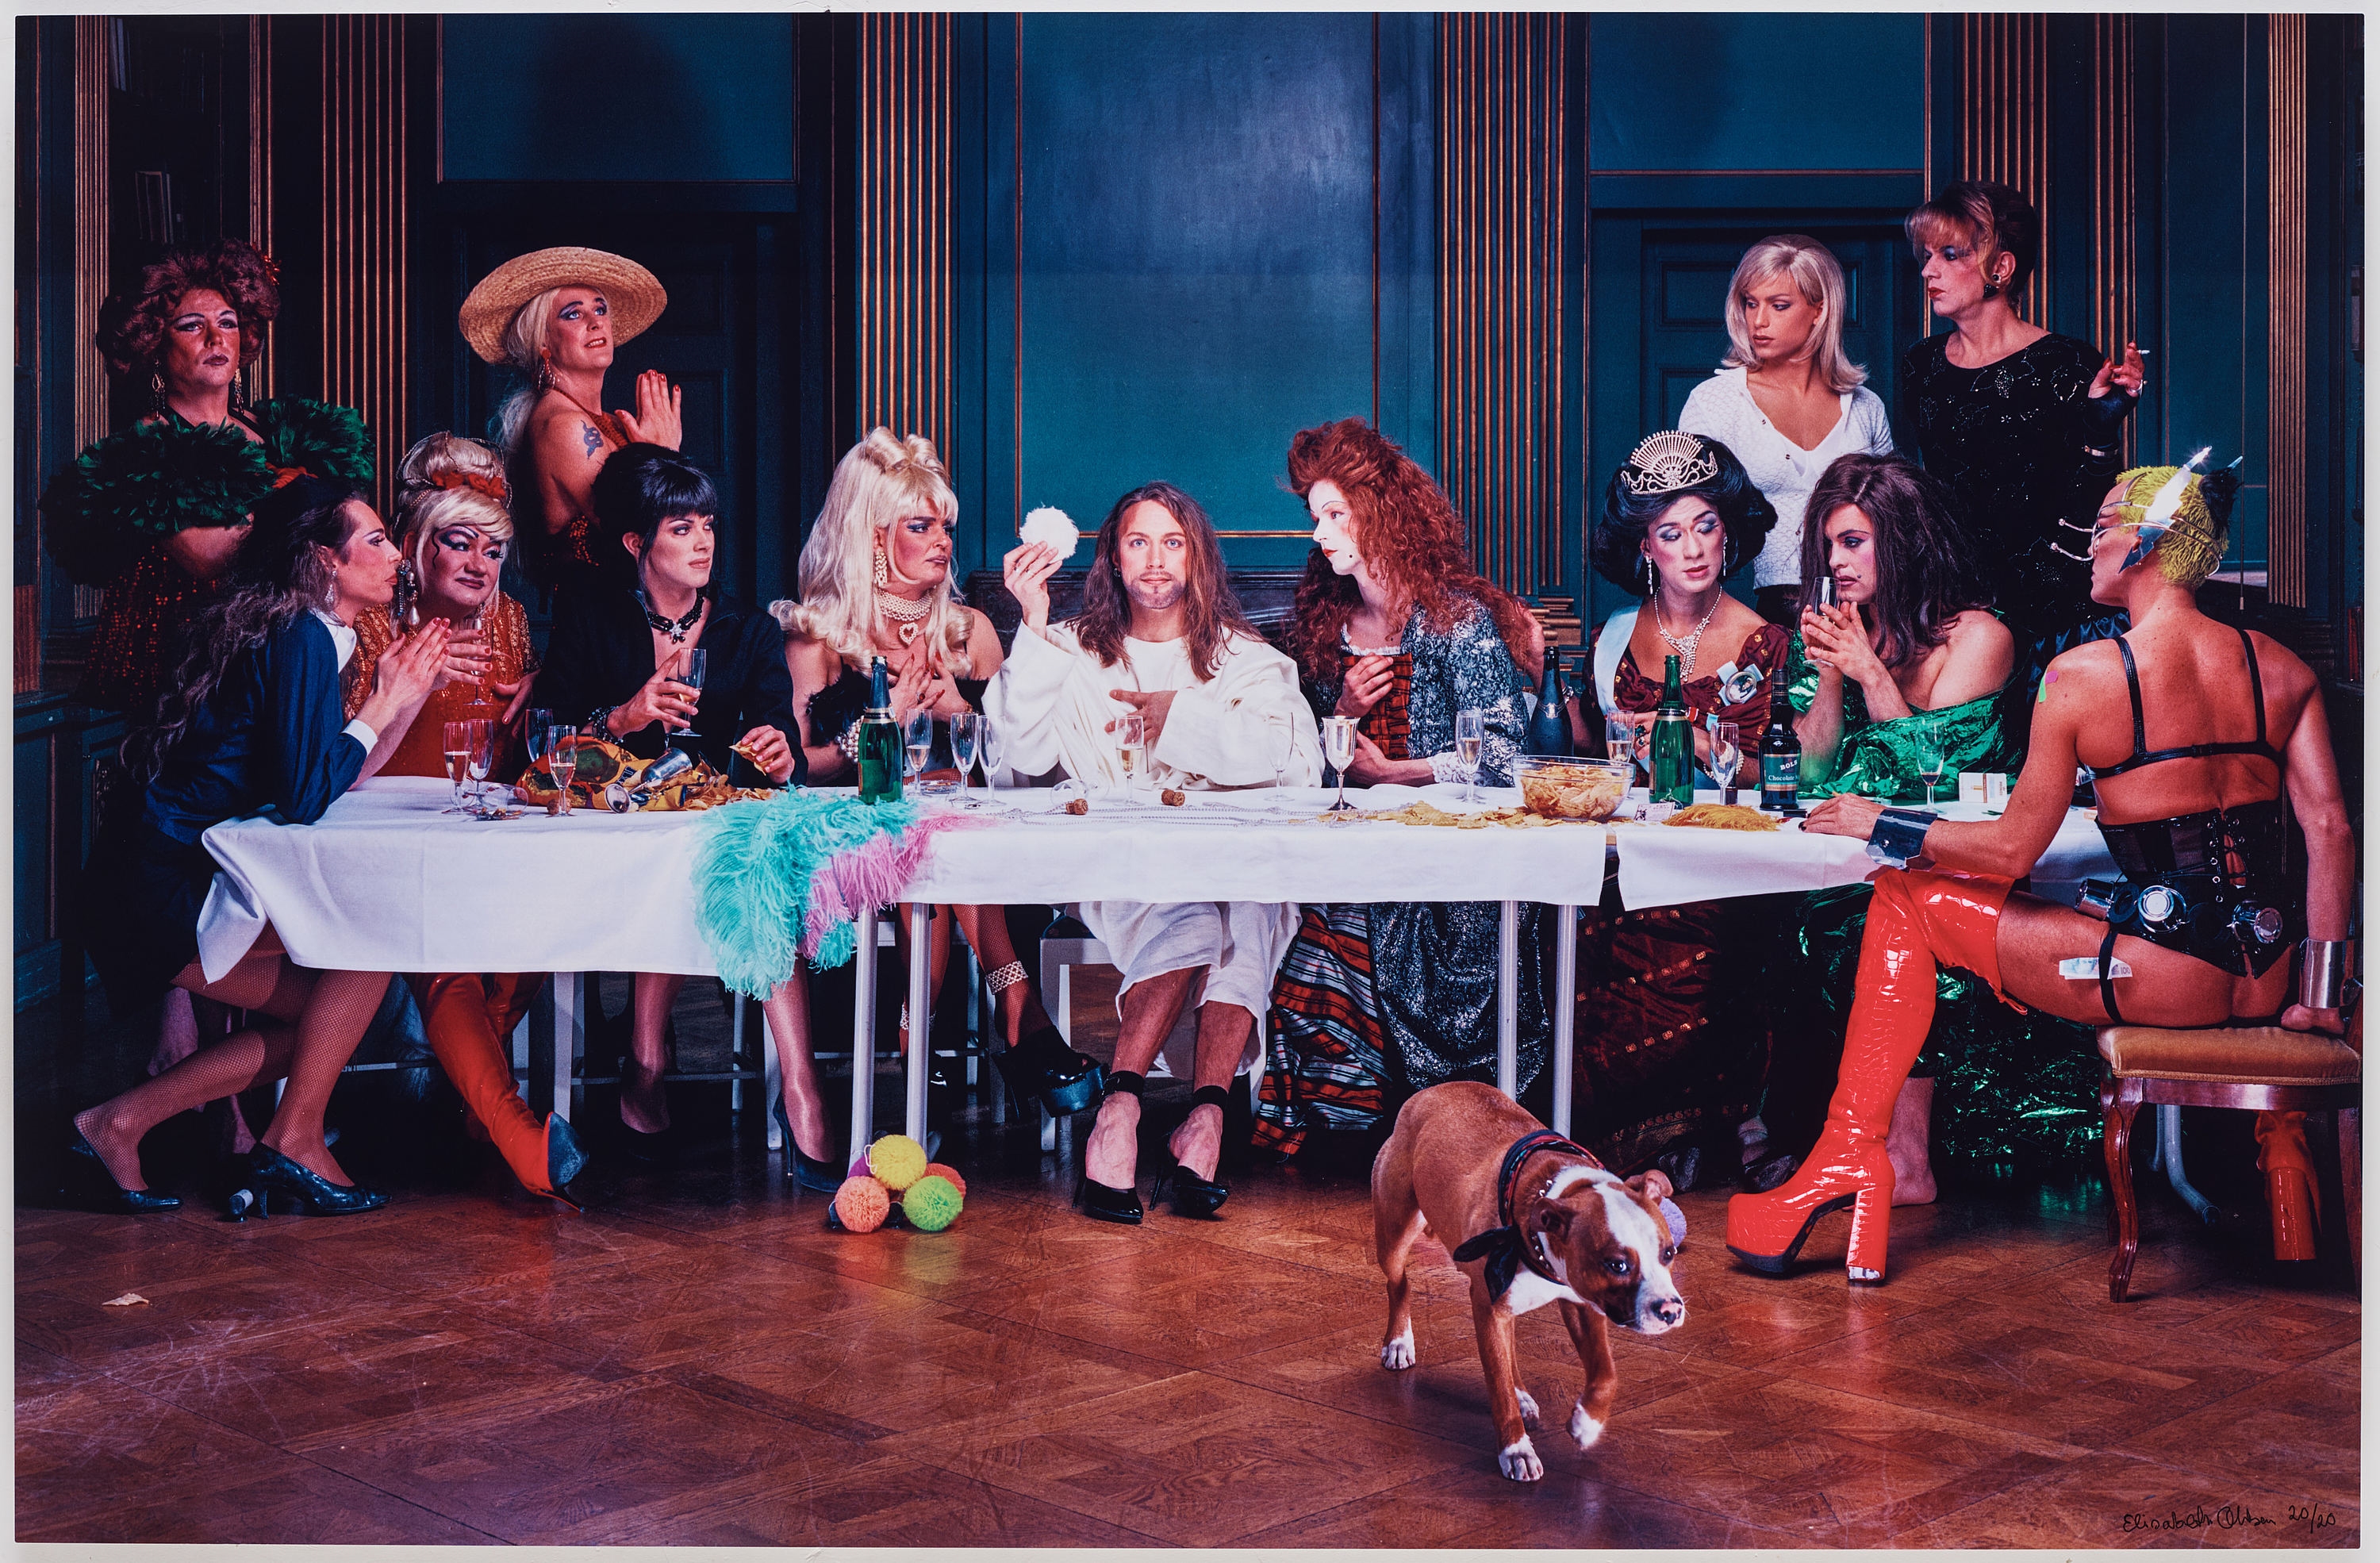 "The Last Supper" from the series "Ecce Homo", 2018 by Elisabeth Ohlson Wallin, 2018